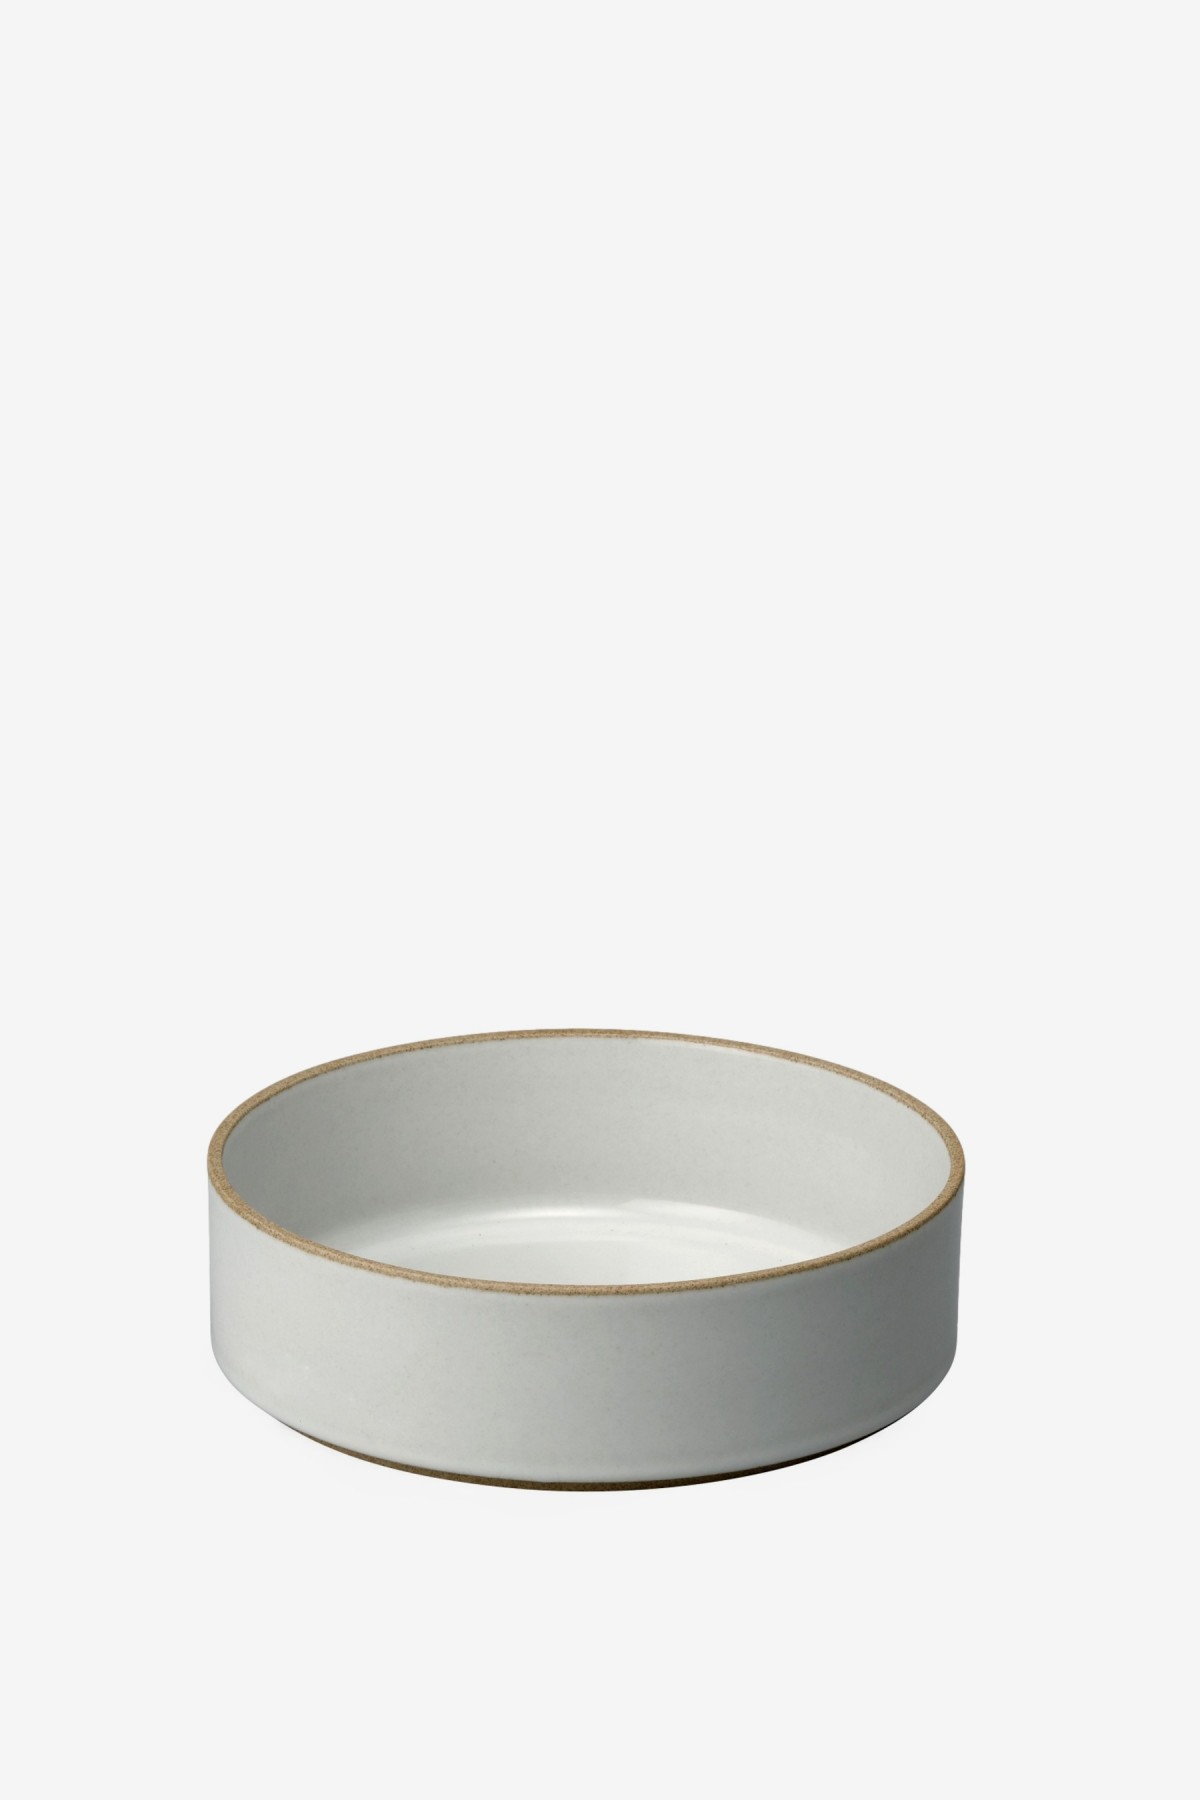 Hasami Porcelain Bowl 185×55mm in Clear Grey